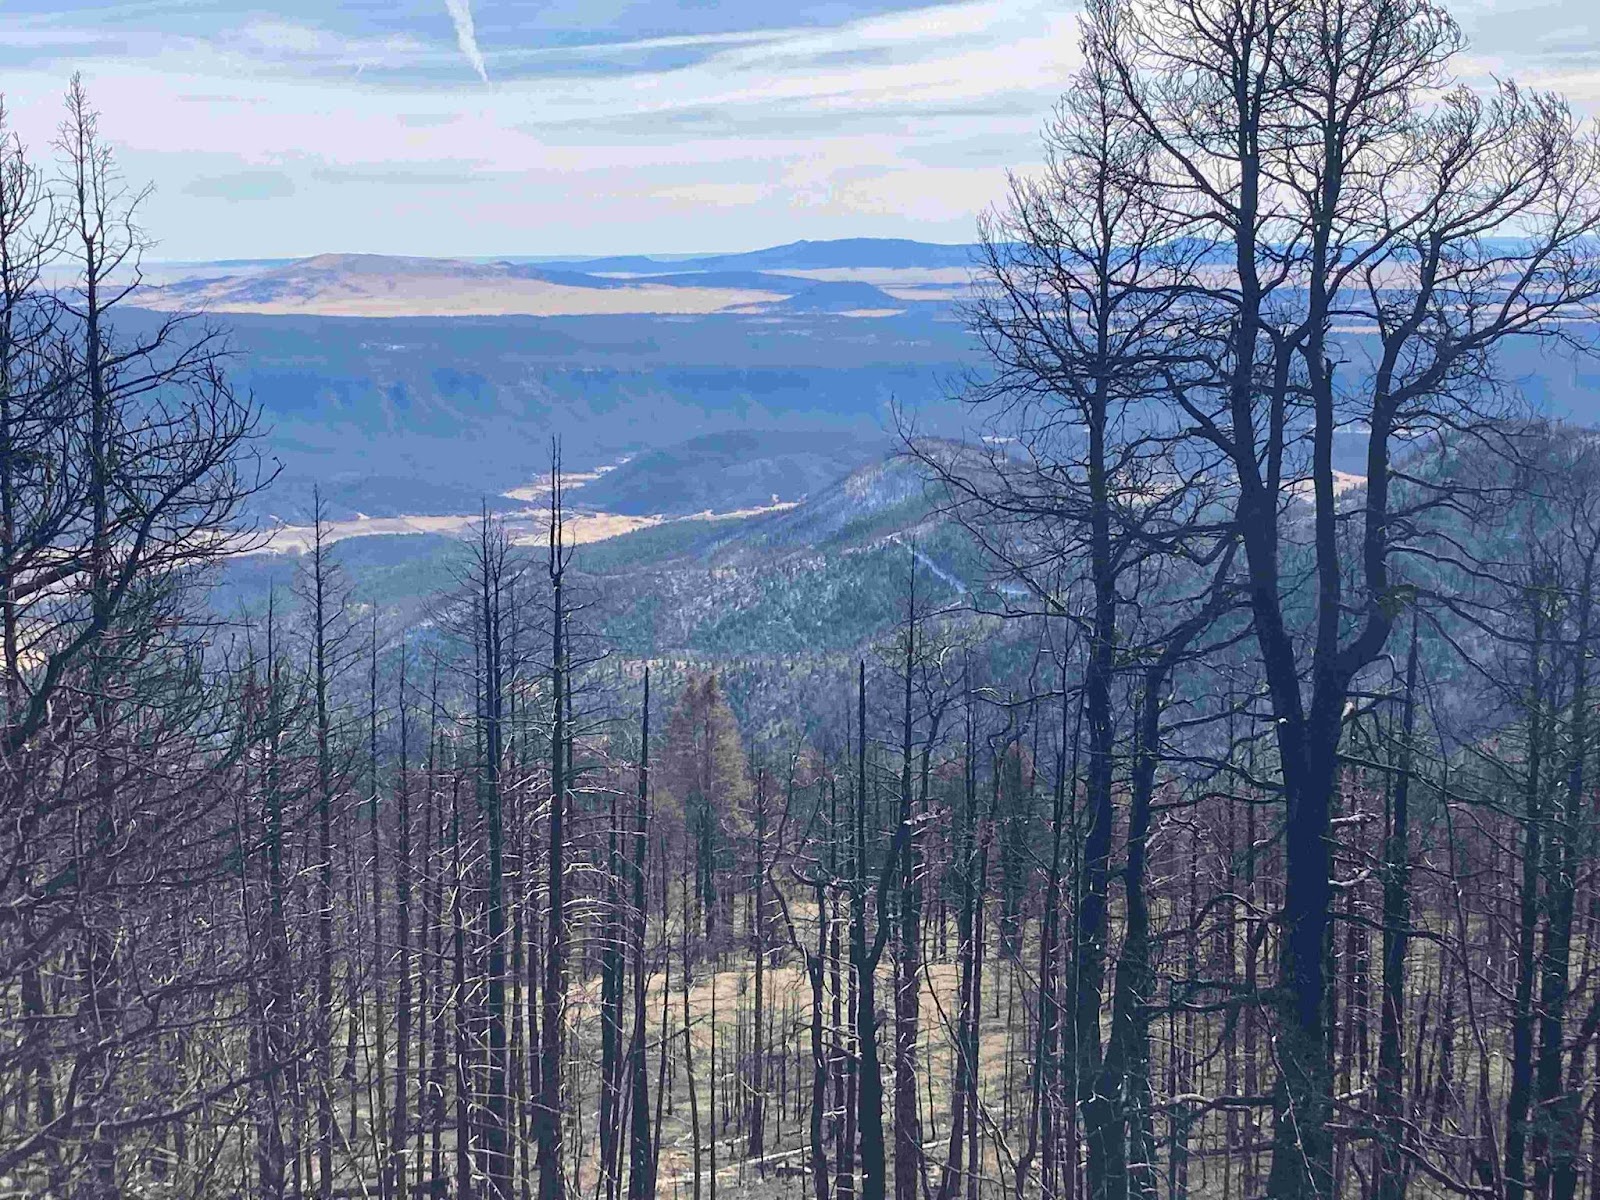 A photo taken from the side of a hill or mountain, looking down. In the foreground is a dense forest of dead, fire-blackened trees. Beyond them, ranges of hills stretch off into the far distance. Huge patches of sun and shadow dapple the landscape, and the sky is streaked white and blue with cloud. The image is lovely in a slow, vast, iconic way. Some of the dead branches shine in the sun almost like spiderweb.